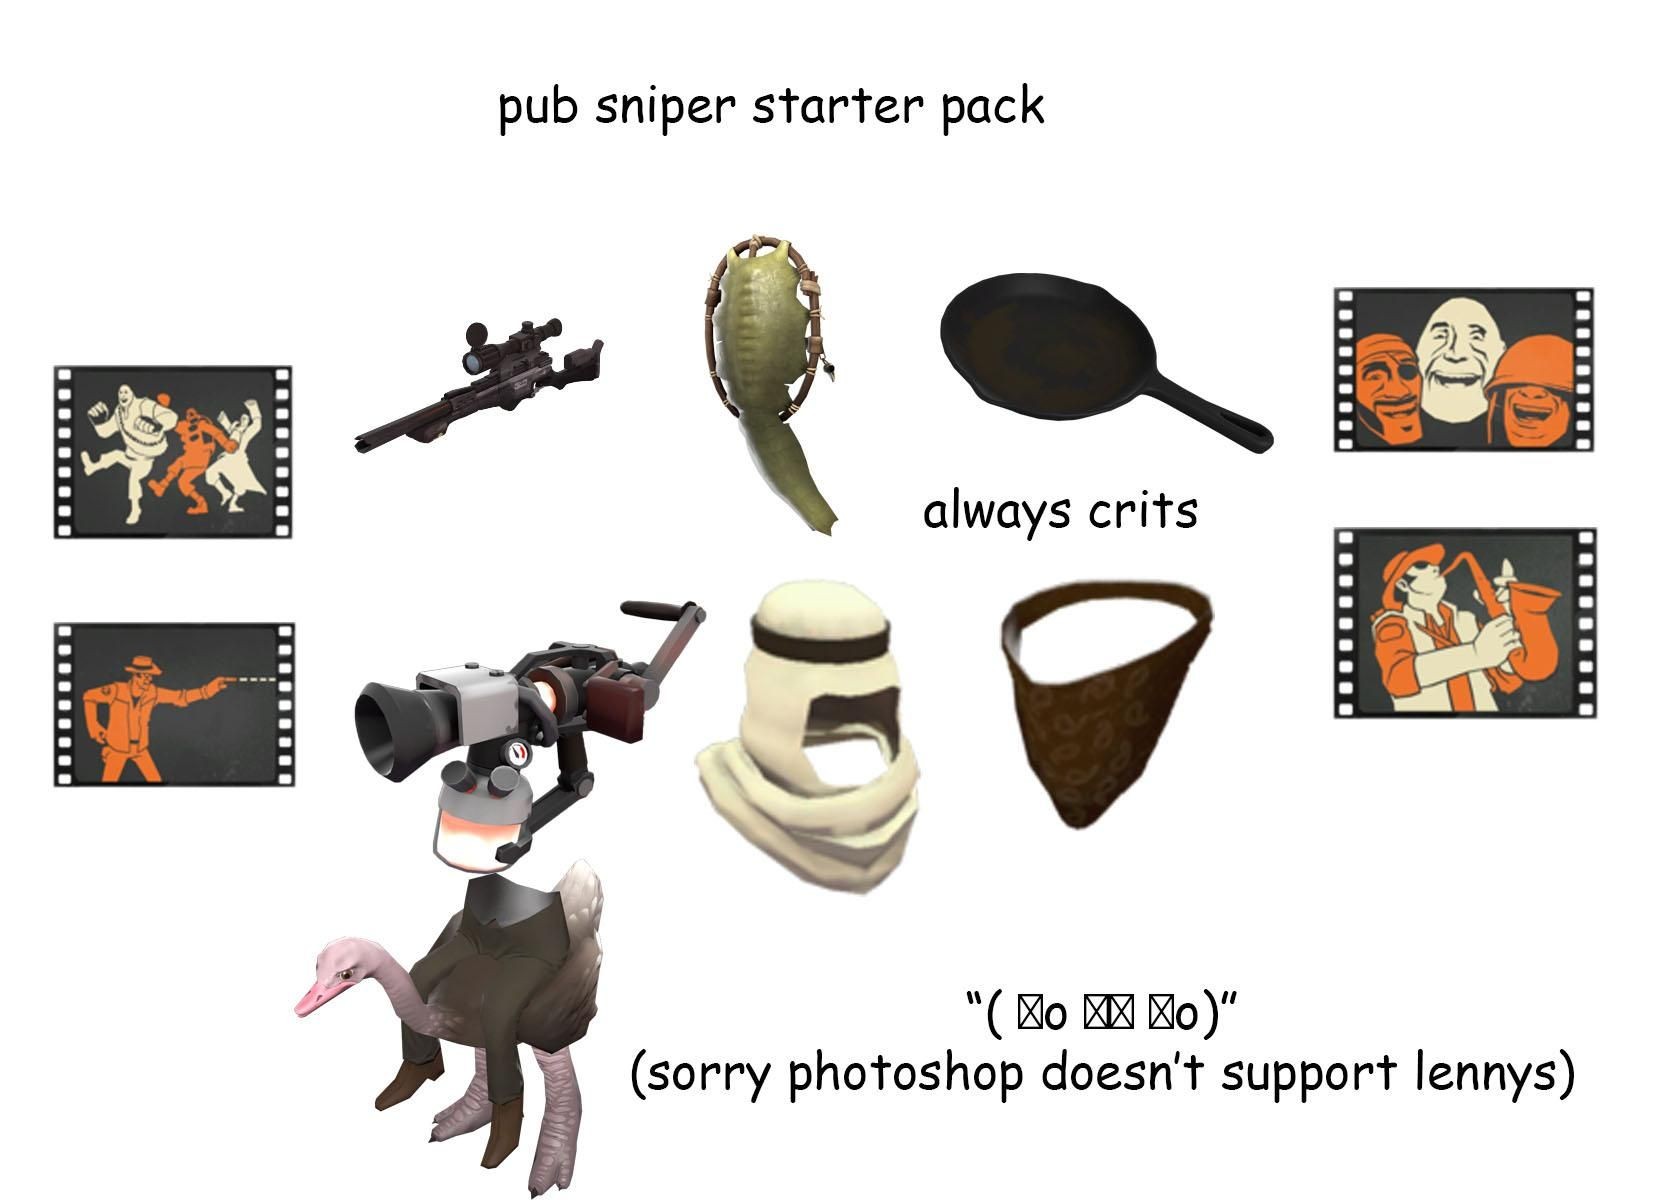 Tf2 Papercraft Guy who Makes Sniper Frag Videos In Pubs" Starter Pack Games